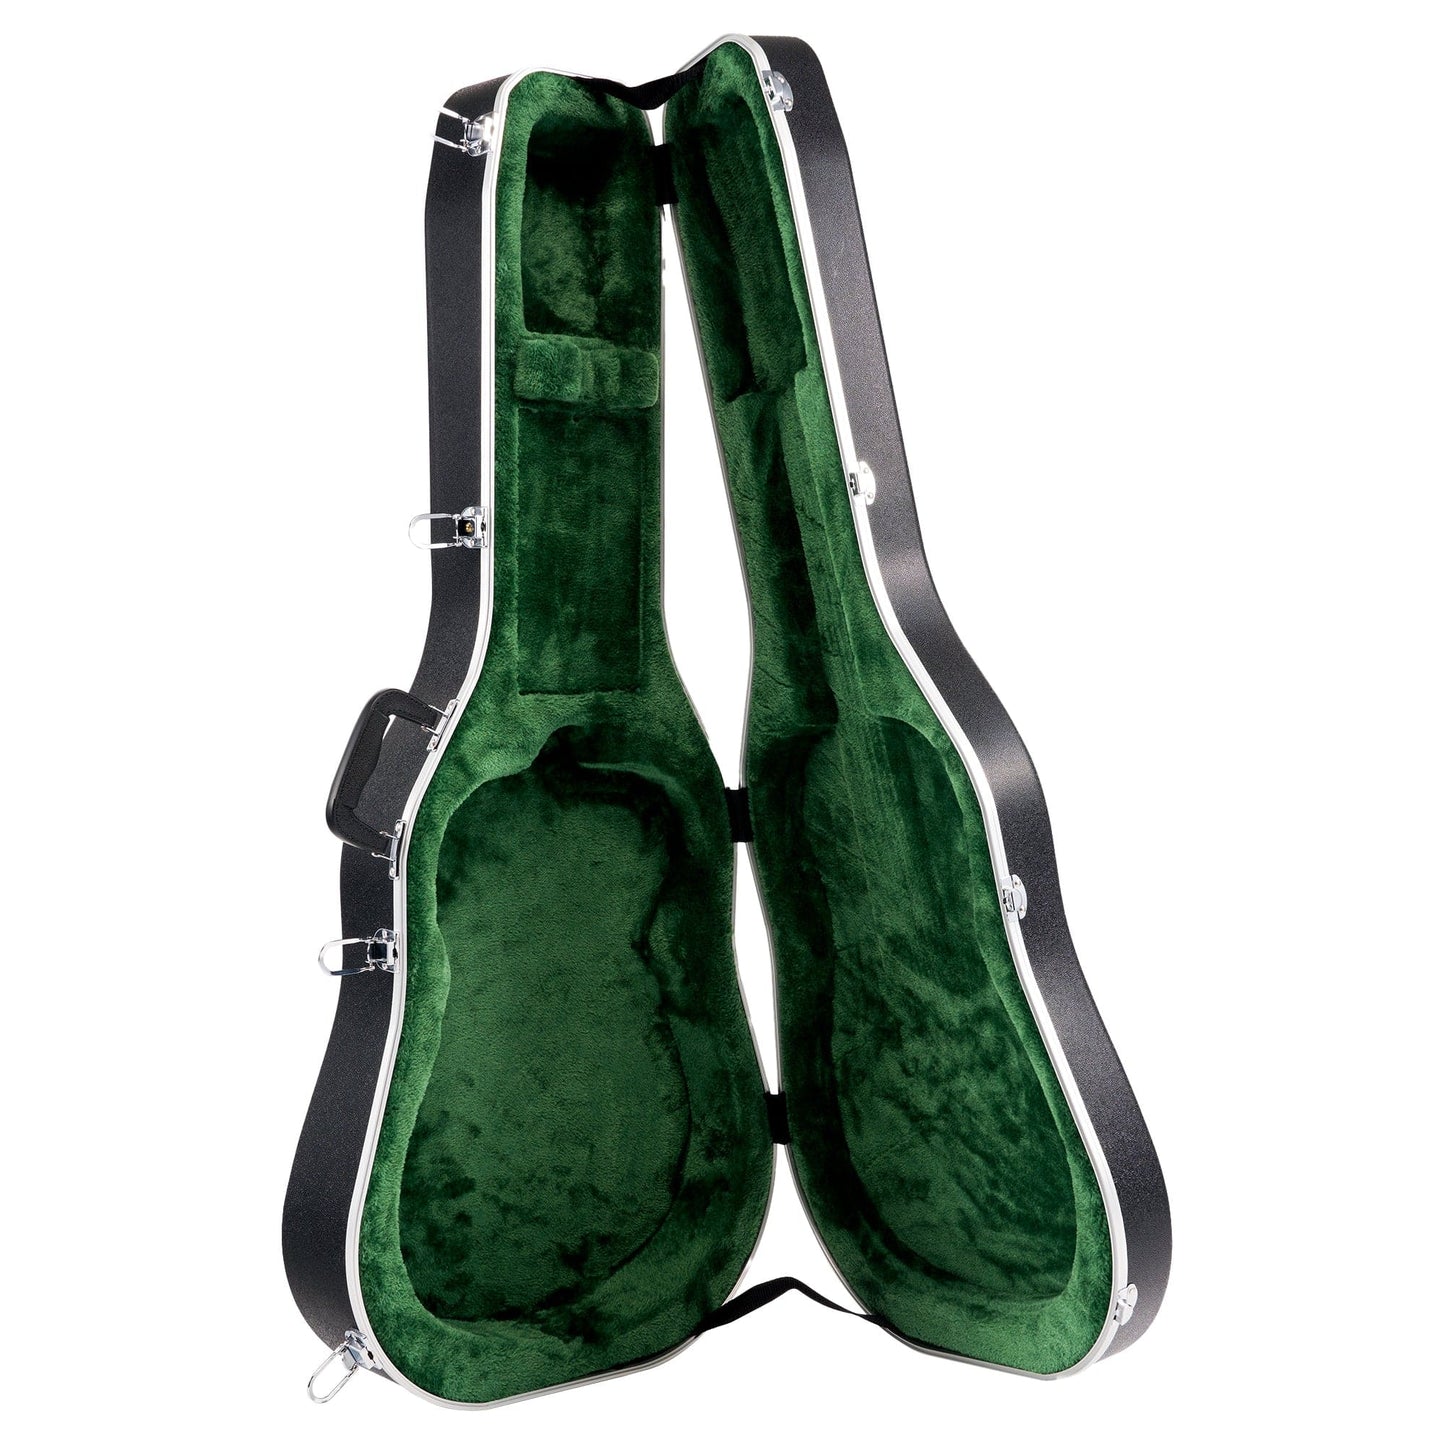 Martin 000-14F 630 Style 000 Case Black with Green Interior Accessories / Cases and Gig Bags / Guitar Cases